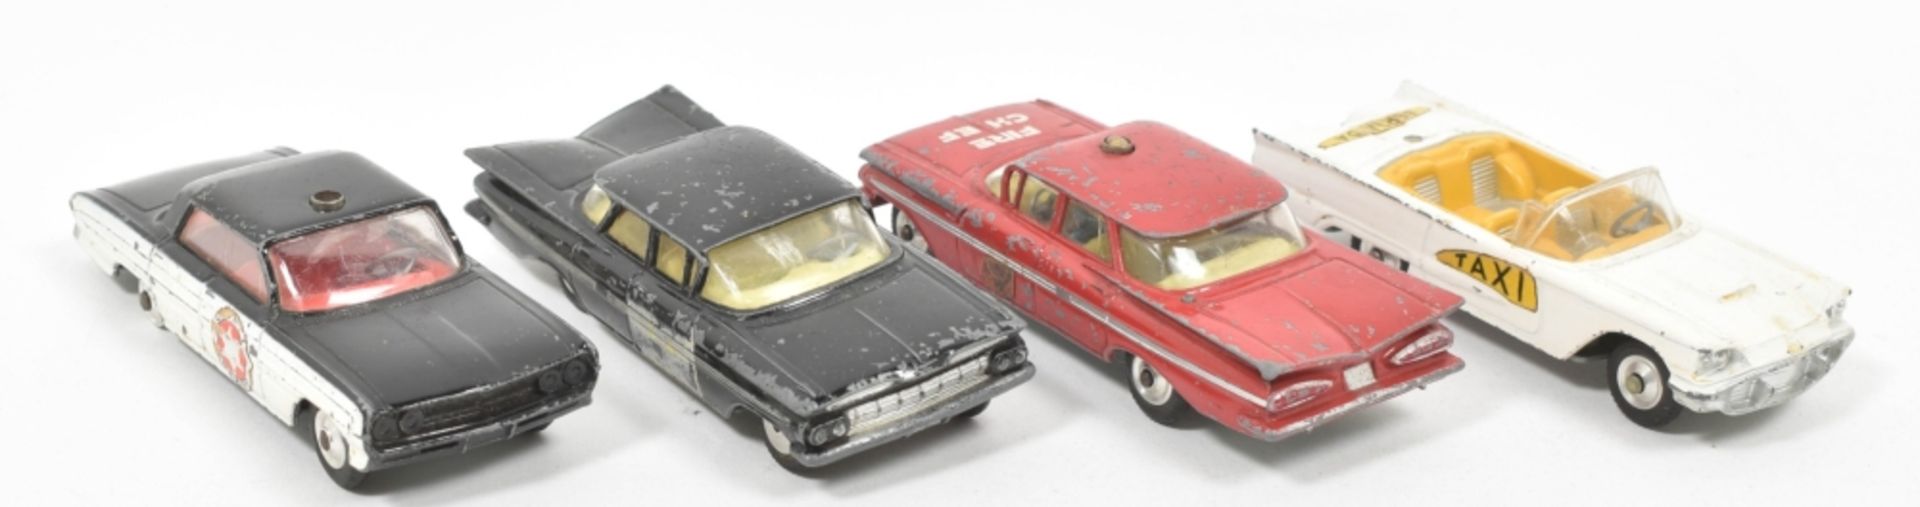 [Model cars] Collection of approx. 70 Dinky Toys, Corgi Toys, Safir and more - Bild 7 aus 10